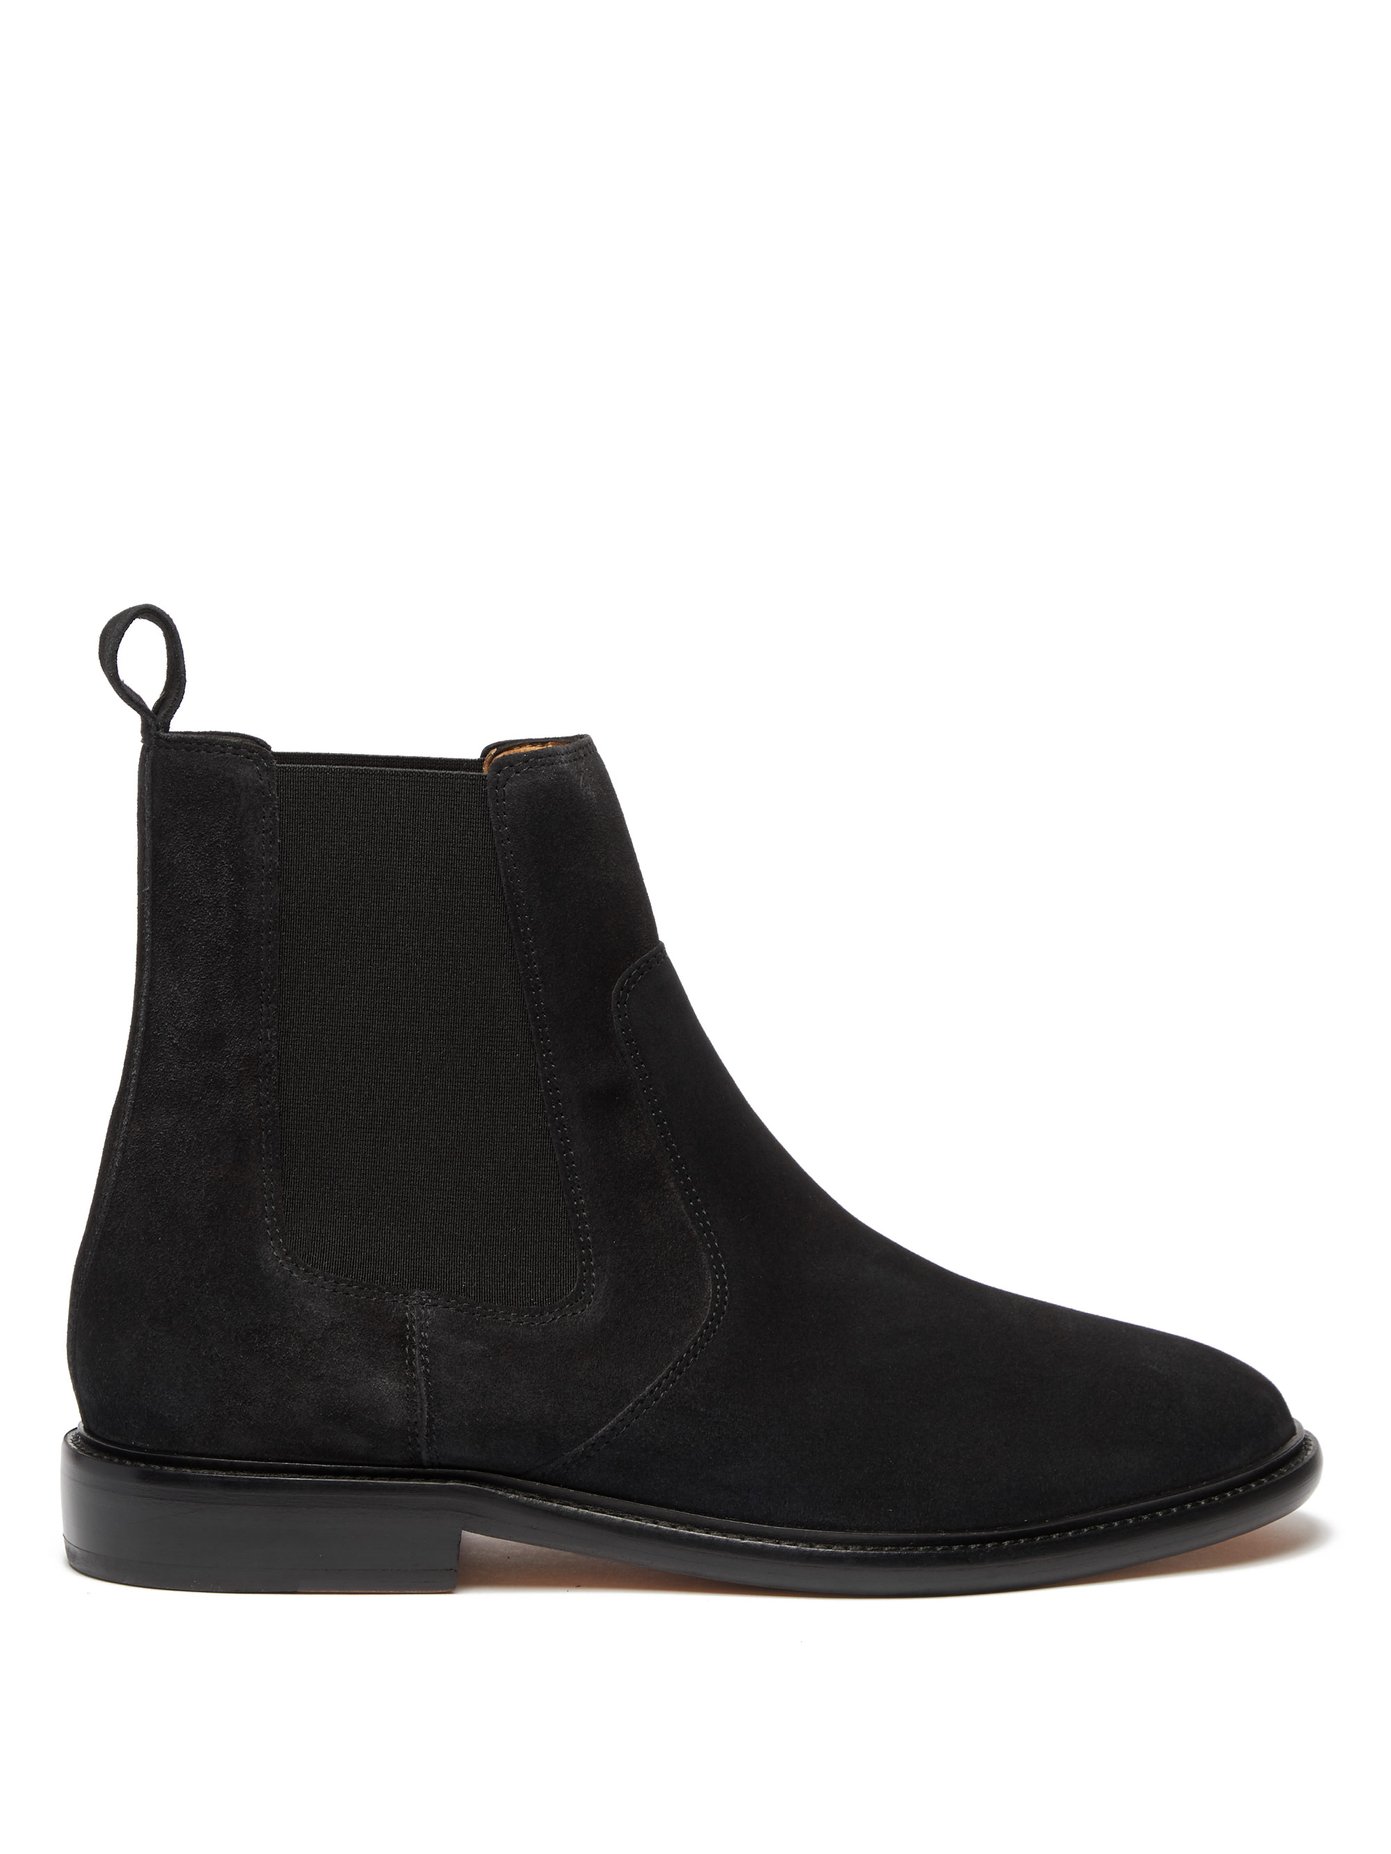 Suede chelsea boots | Isabel Marant 